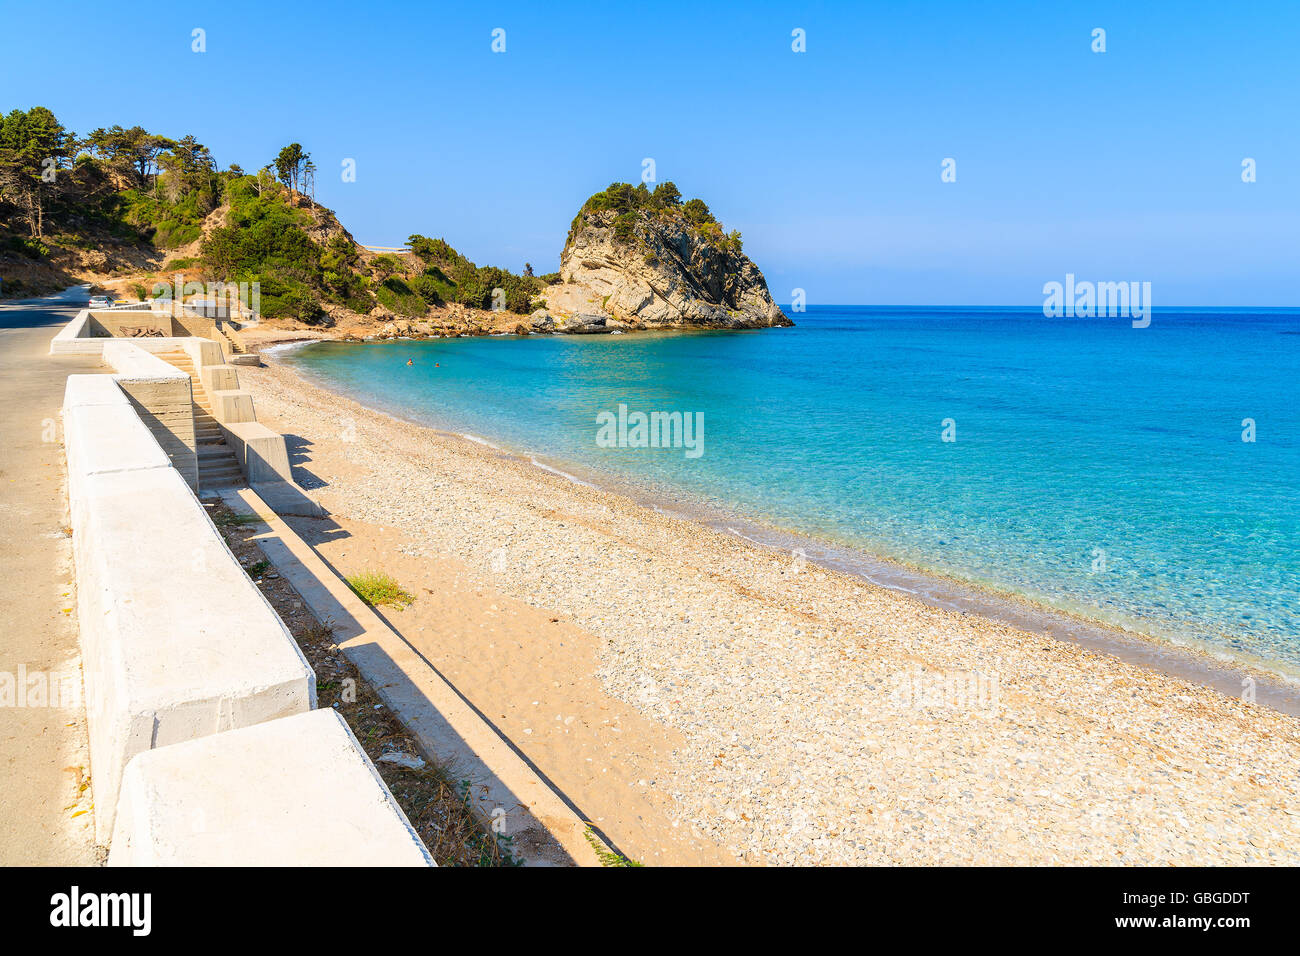 View of Potami beach with turquoise crystal clear water, Samos island, Greece Stock Photo